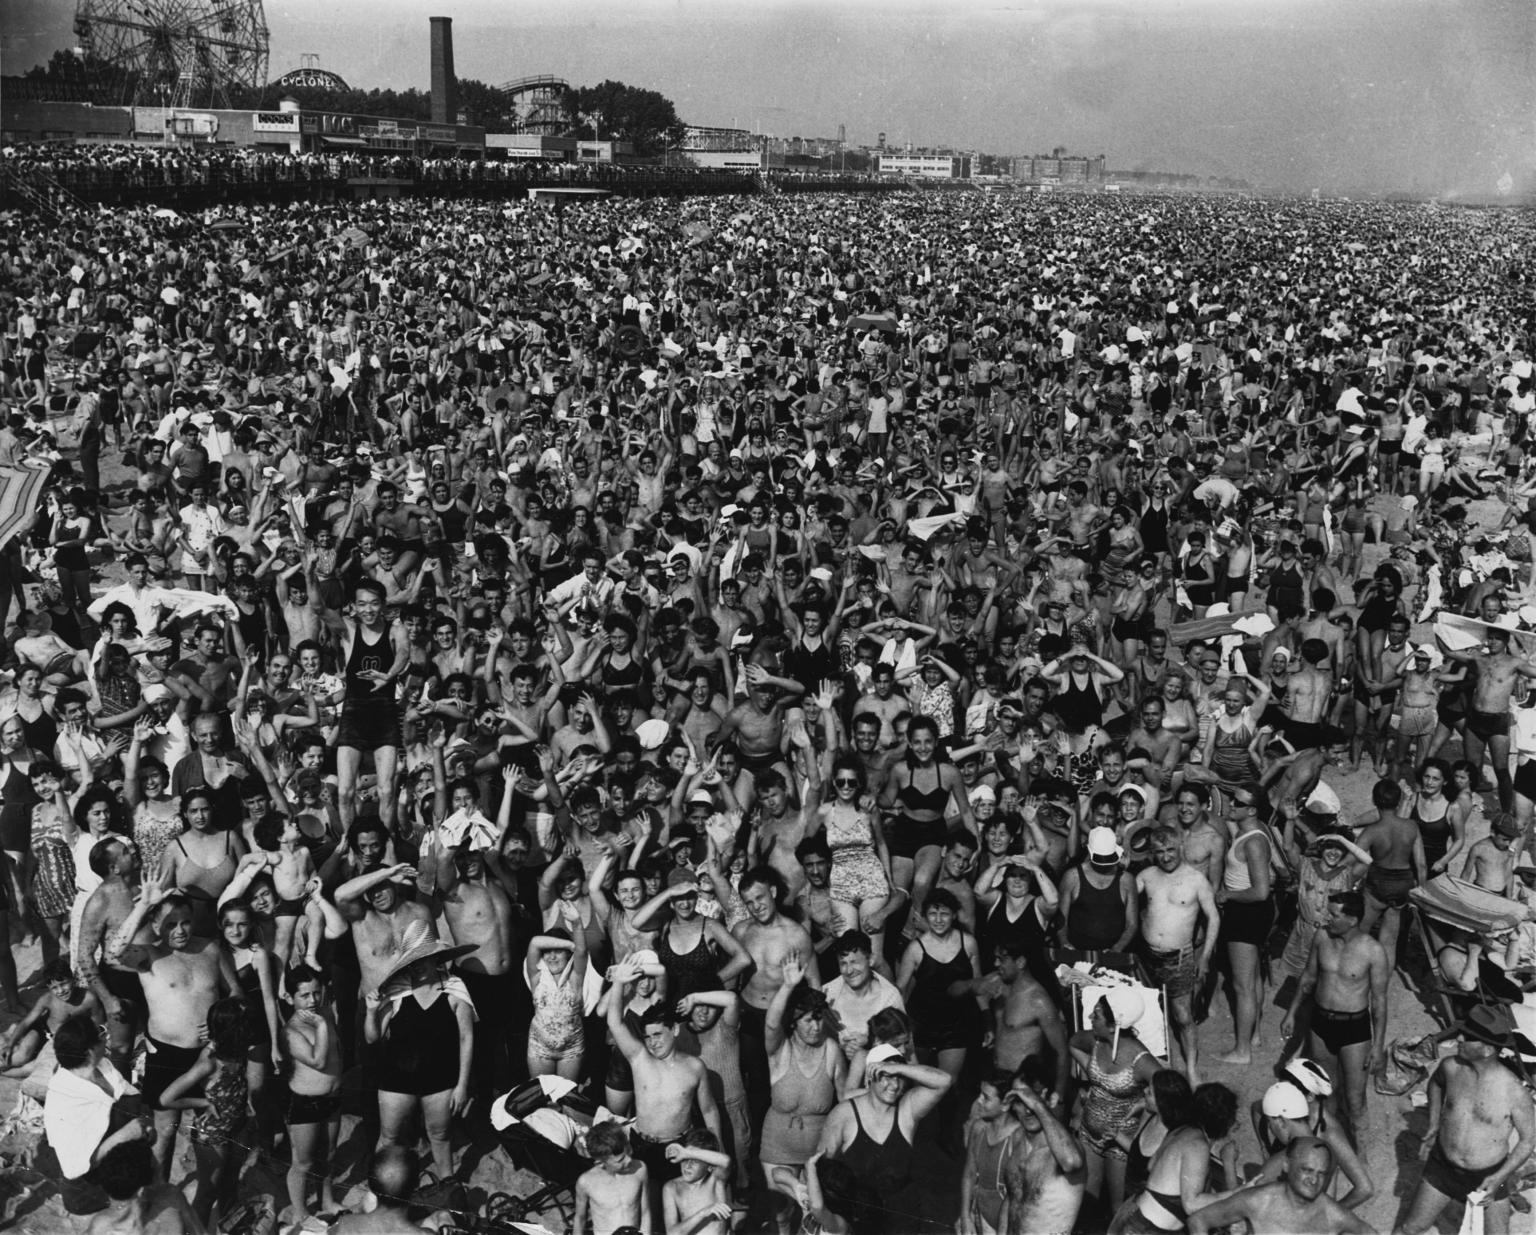 Aerial photograph of hundreds of people crowded together on beach with amusement park in background.